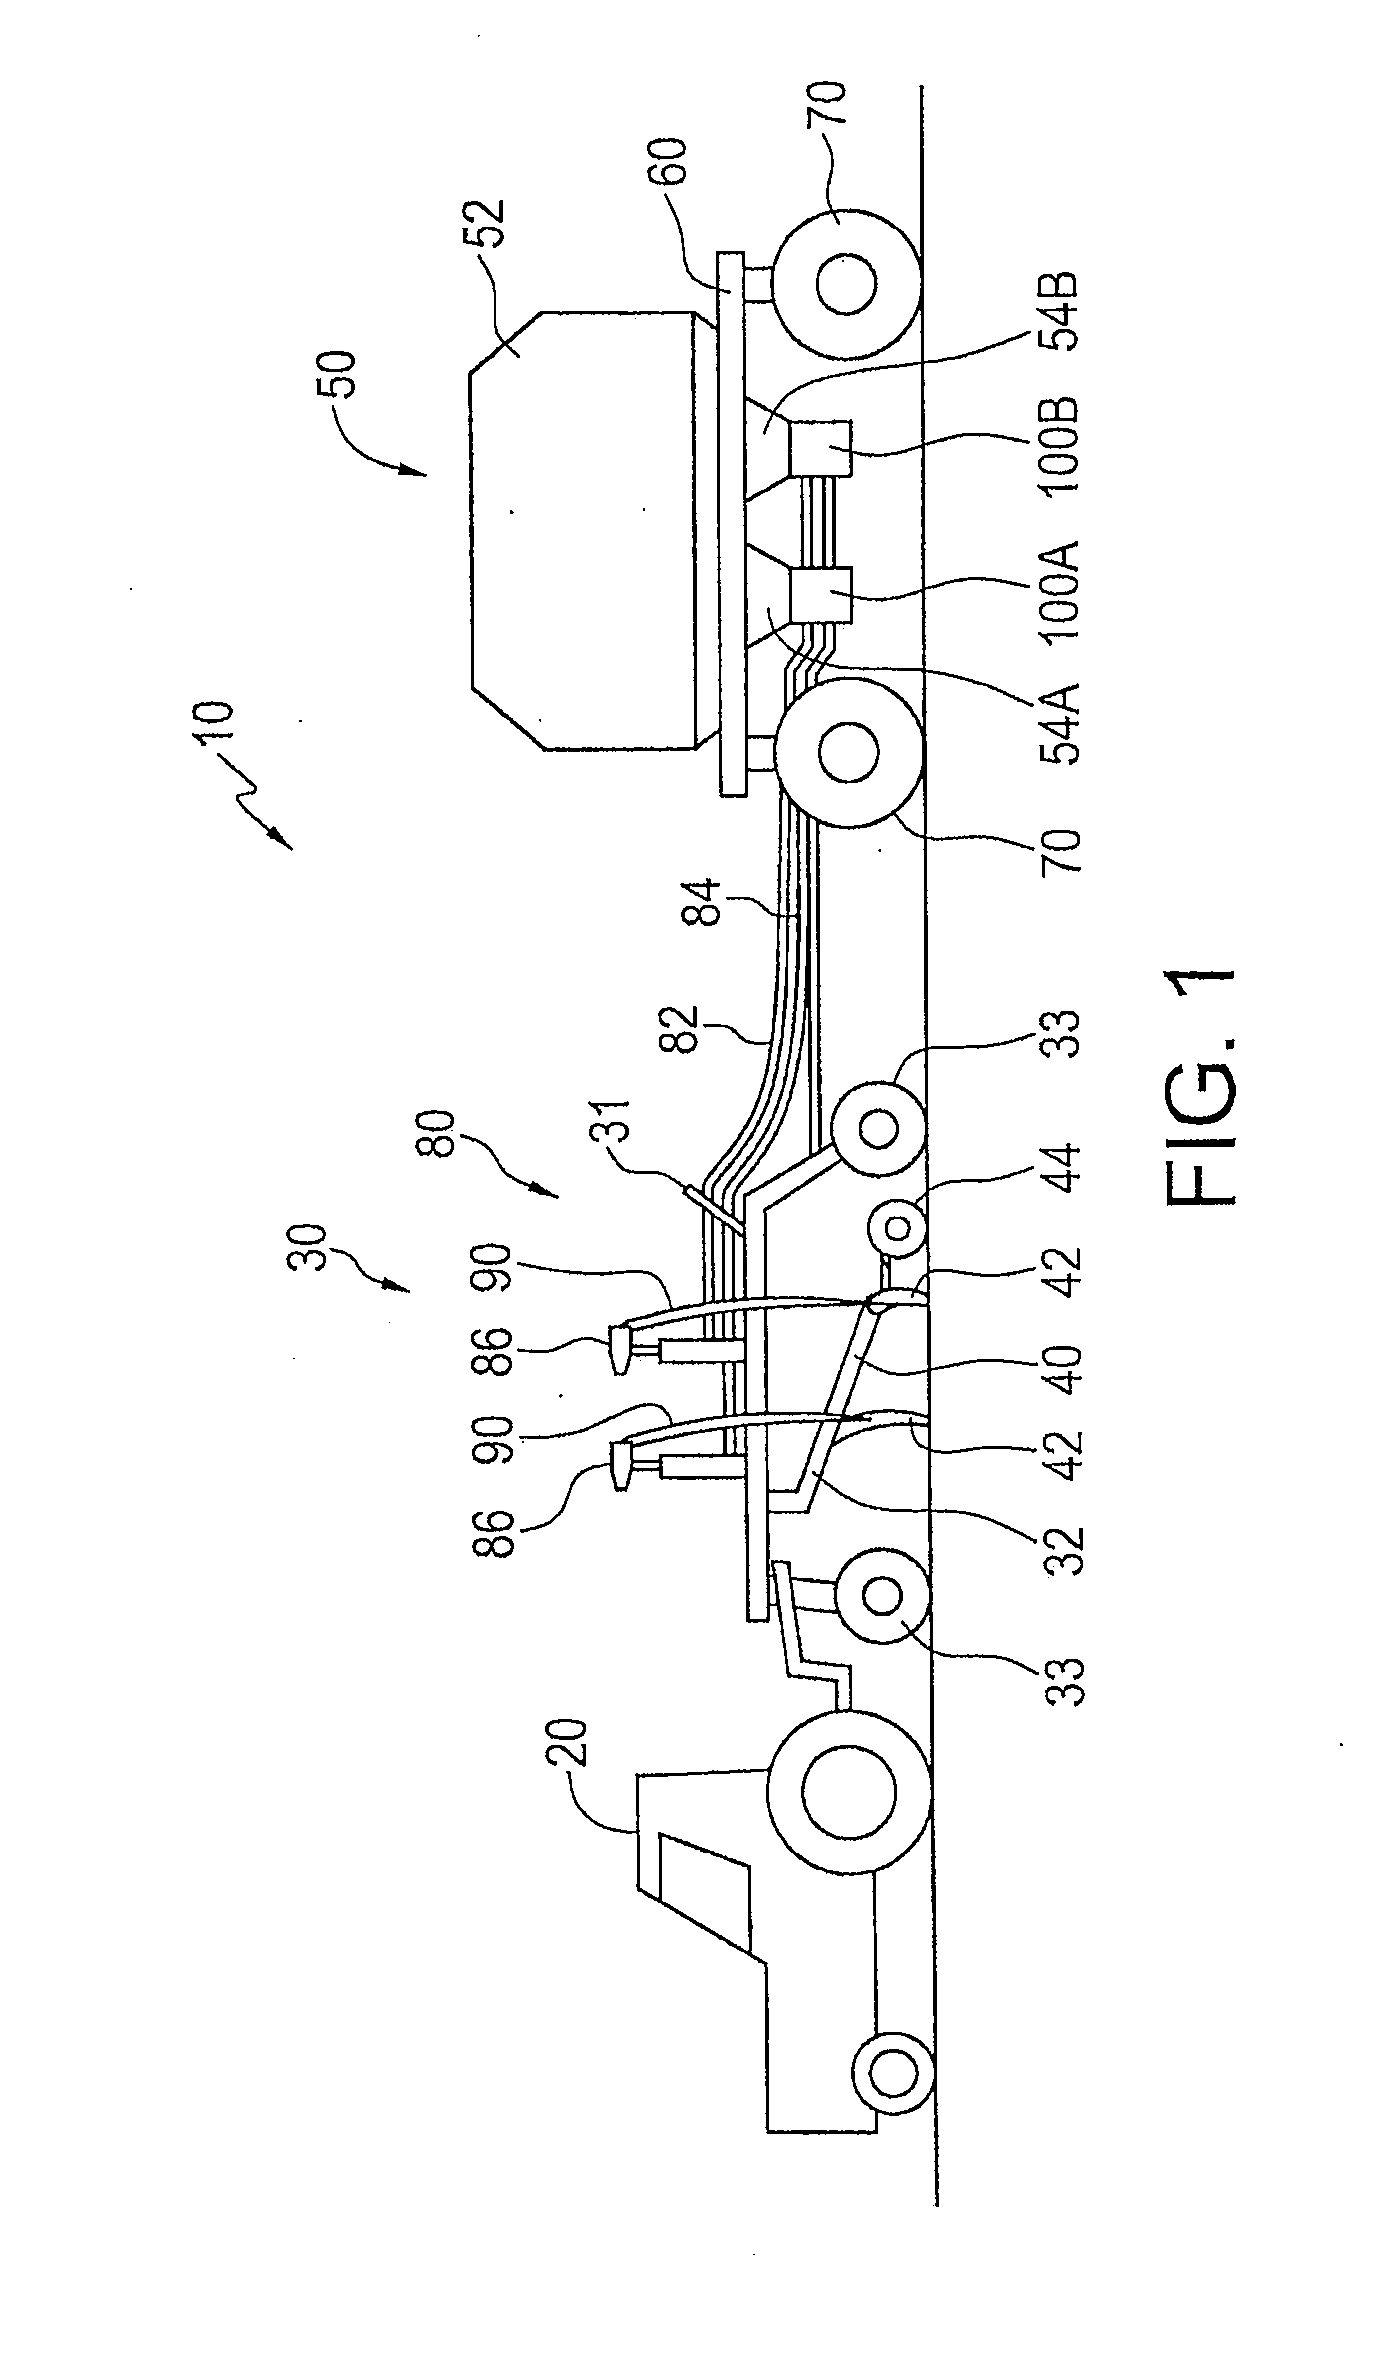 Metering assembly for an air seeder